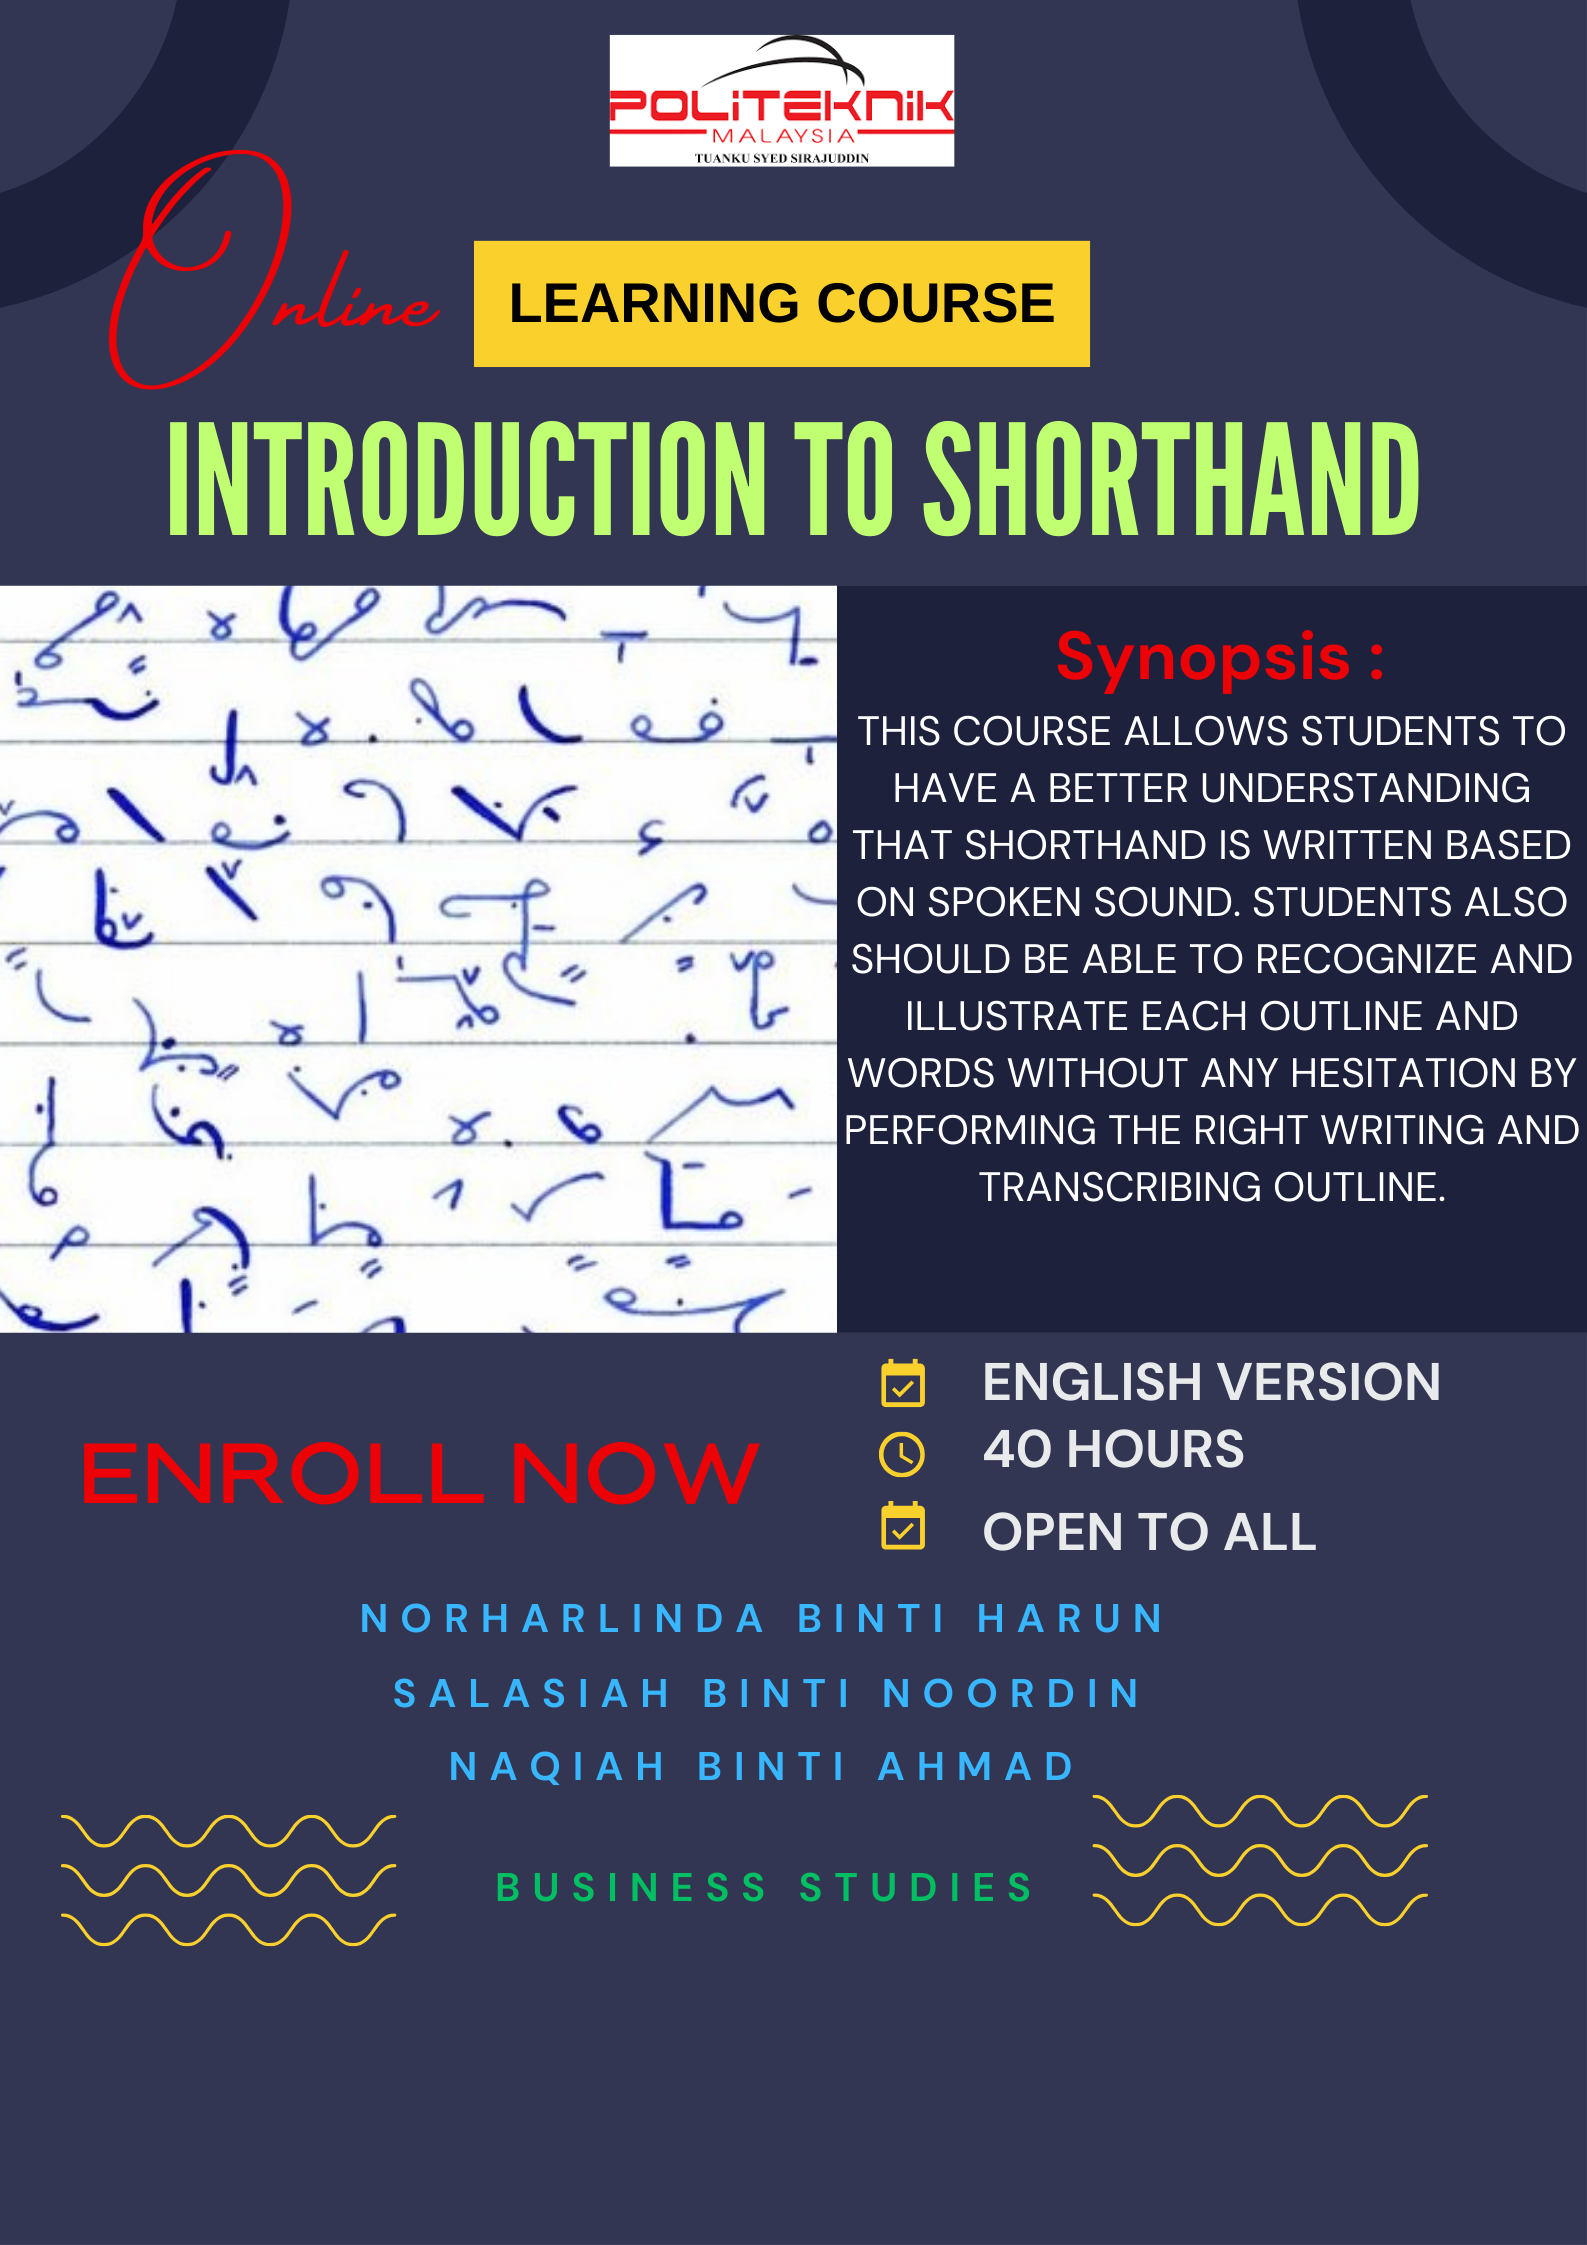 INTRODUCTION TO SHORTHAND 